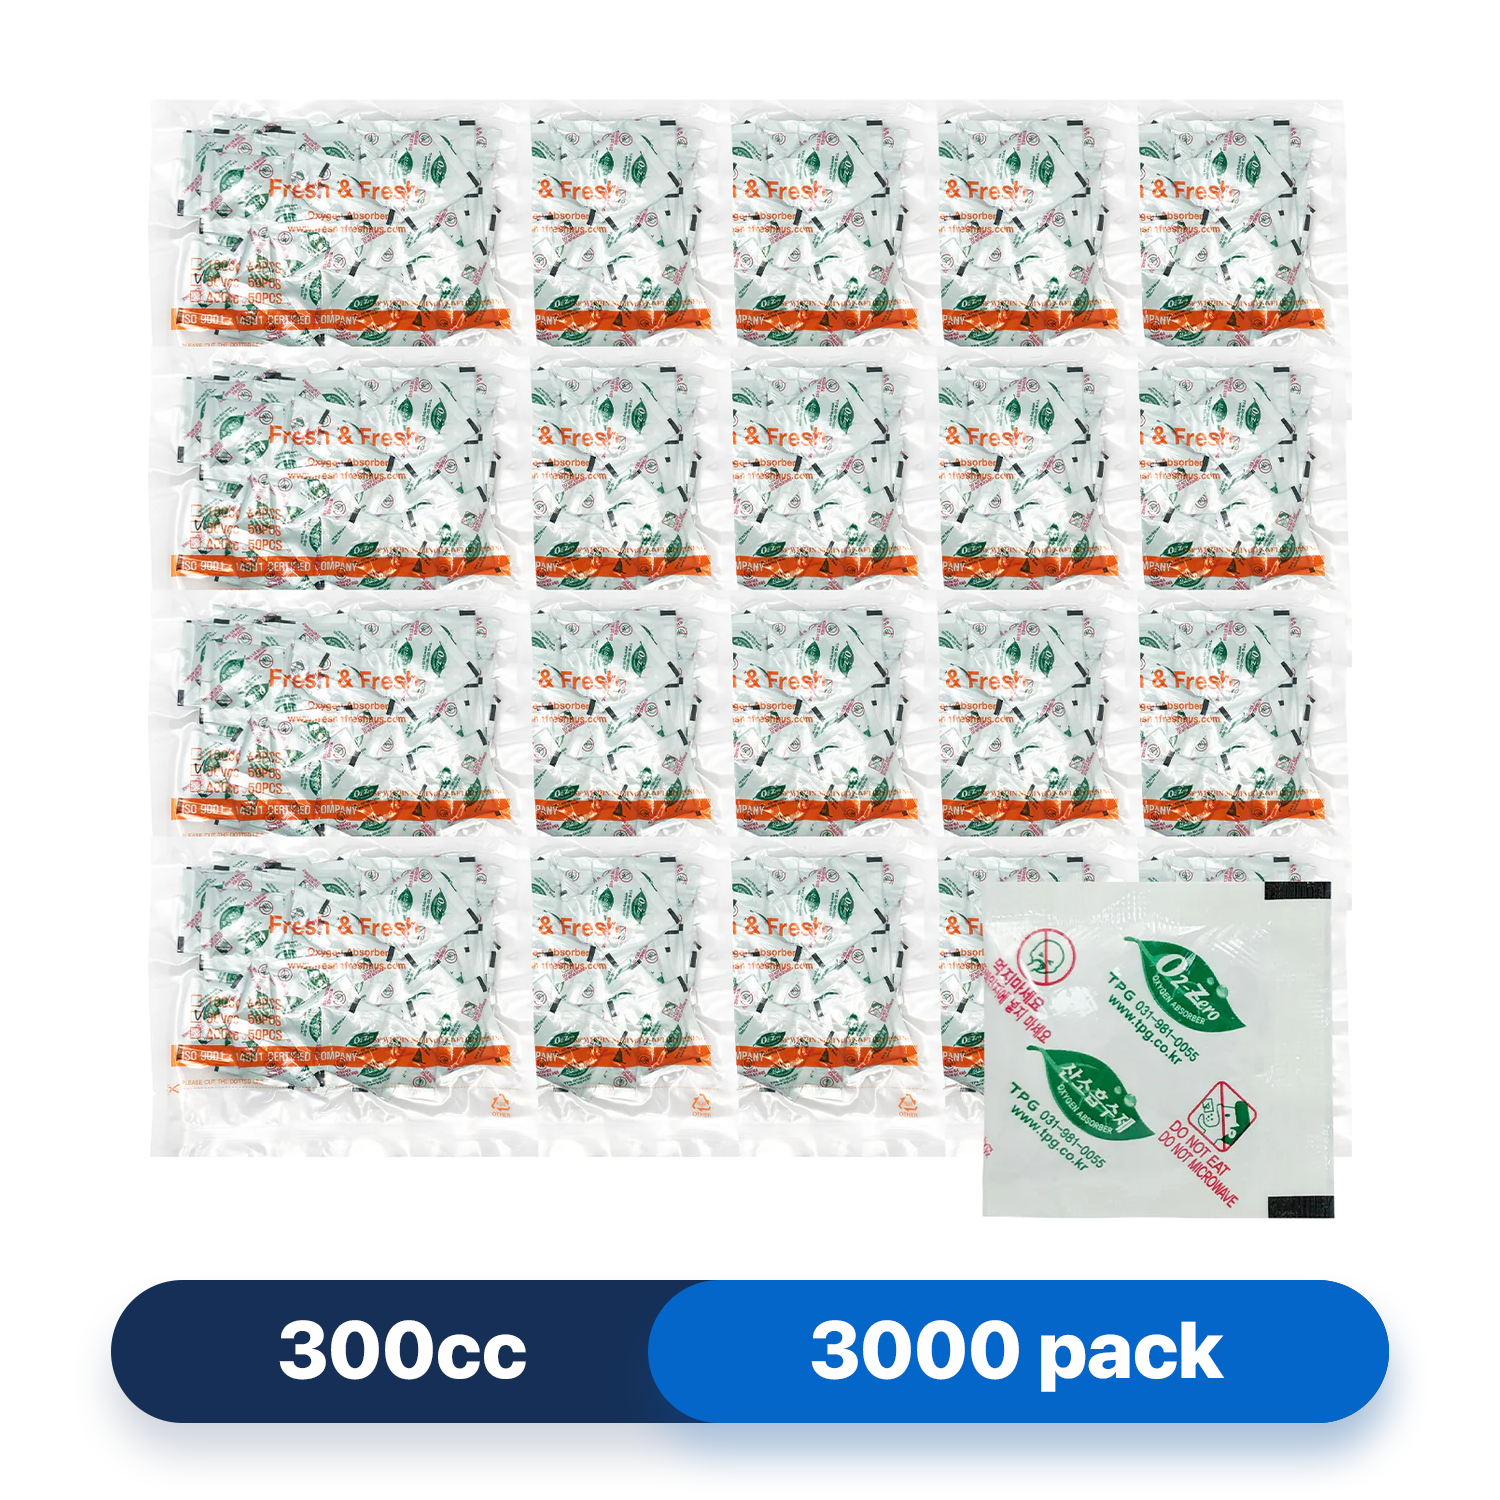 Fresh & Fresh (3000 Packs) 300 CC Premium Oxygen Absorbers(60 Bag of 50 Packets) - ISO 9001 Certified Facility Manufactured